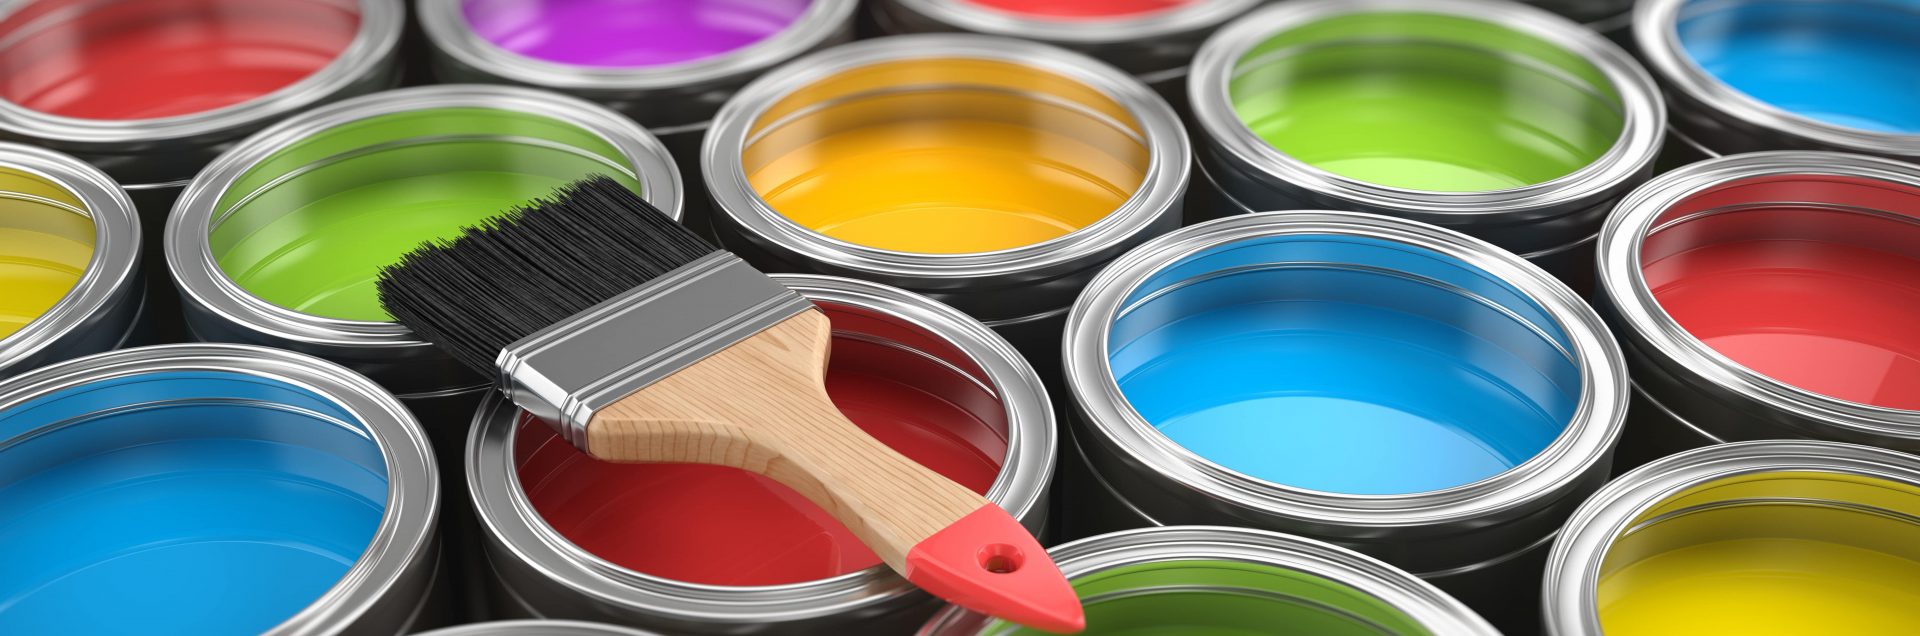 House Painting Supplies Checklist - The Home Improvement Advisor